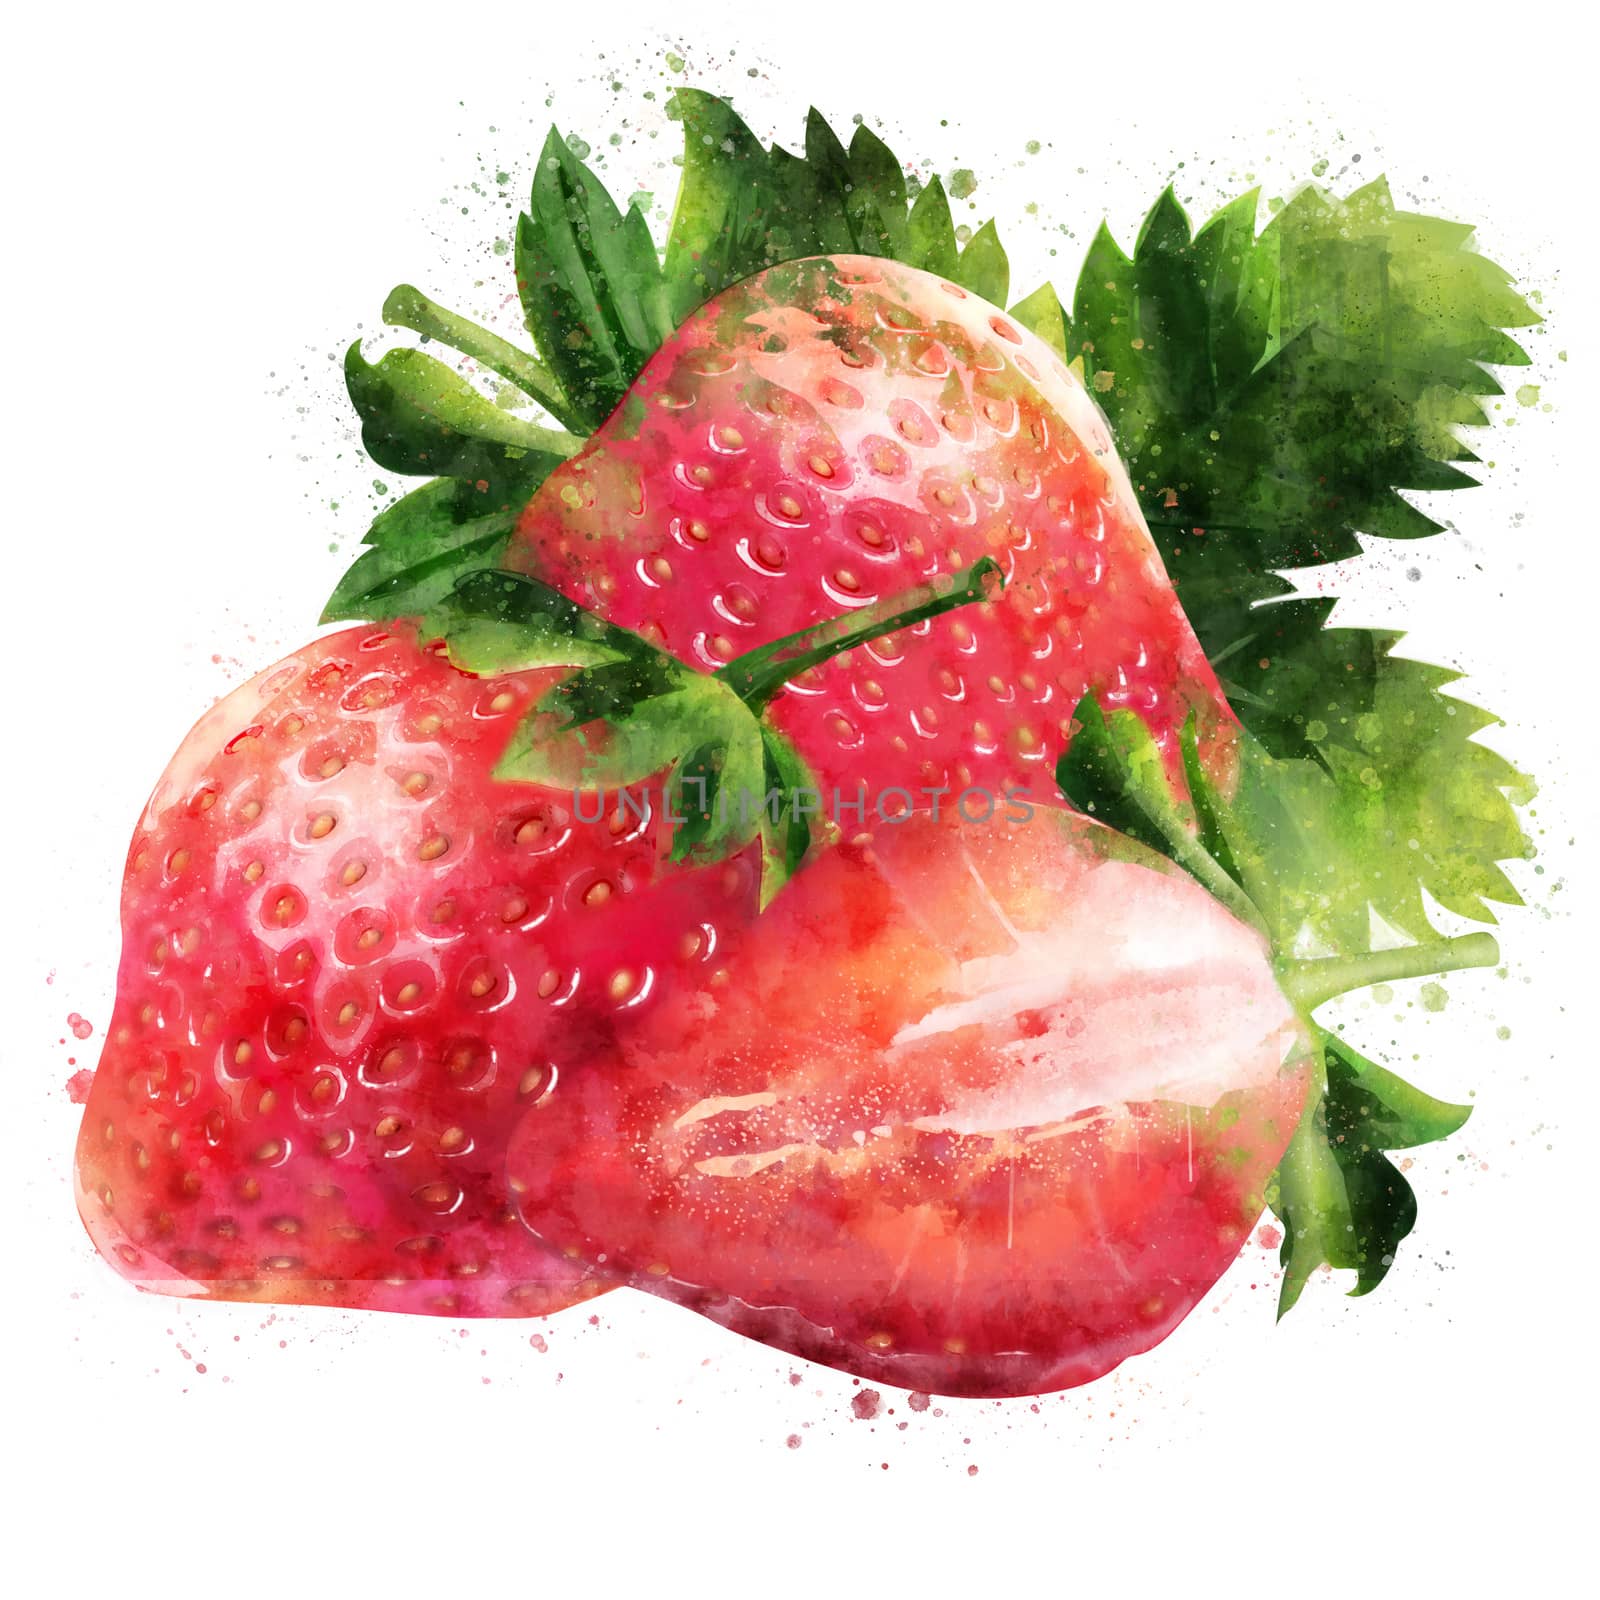 Strawberry on white background. Watercolor illustration by ConceptCafe